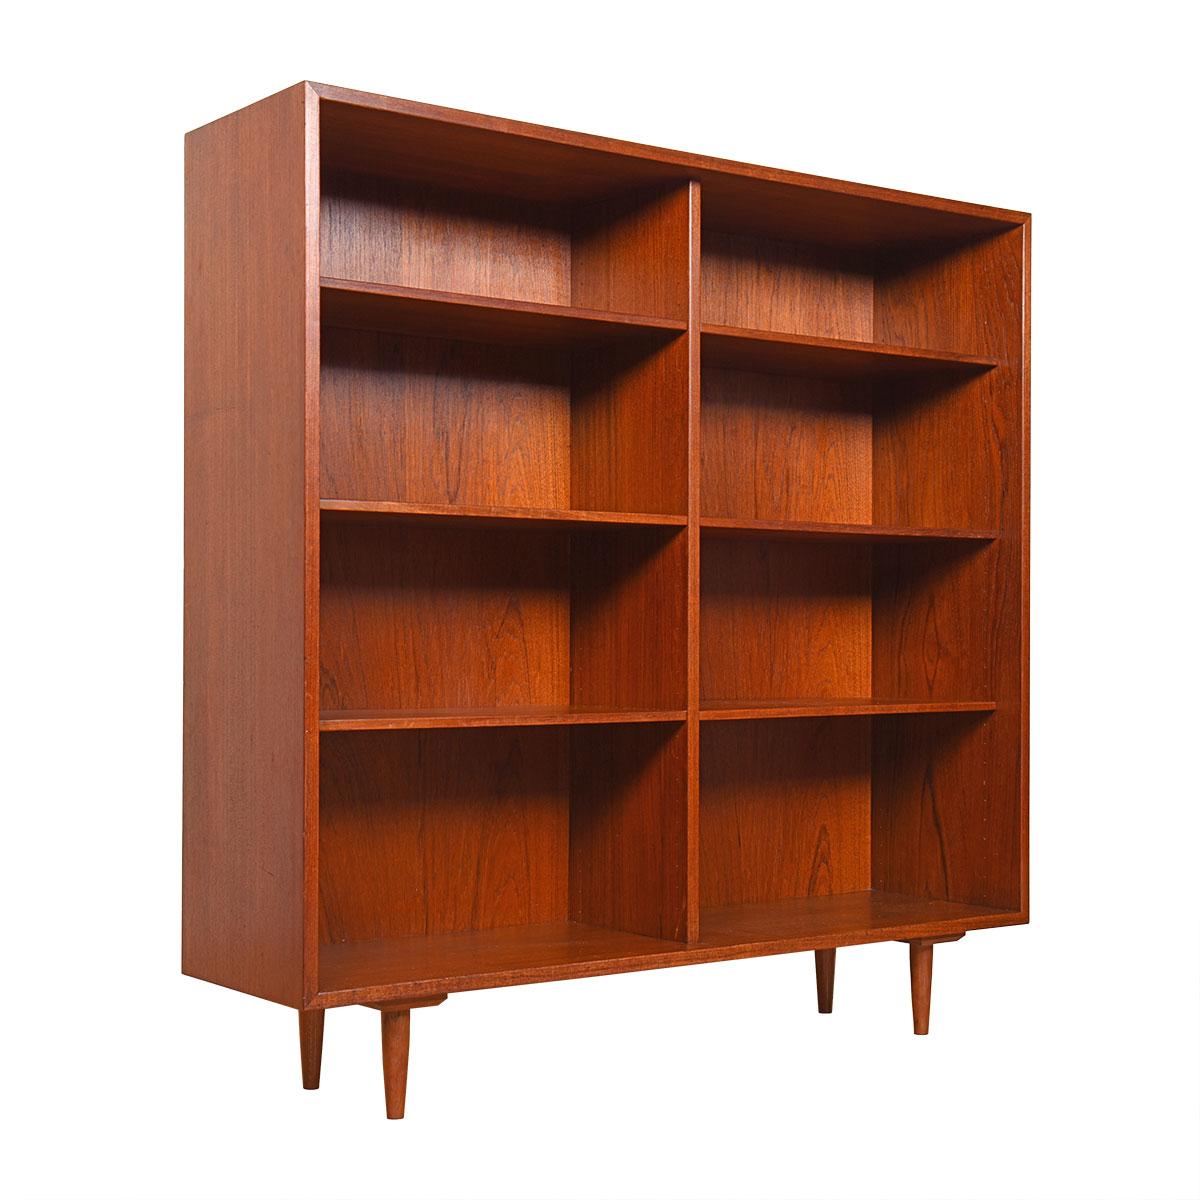 Stunning Danish Modern bookcase — earlier vintage with a deep patina.
Fabricated of teak, the graining and tones make a gorgeous backdrop to any display. Deeper than most at 14.25